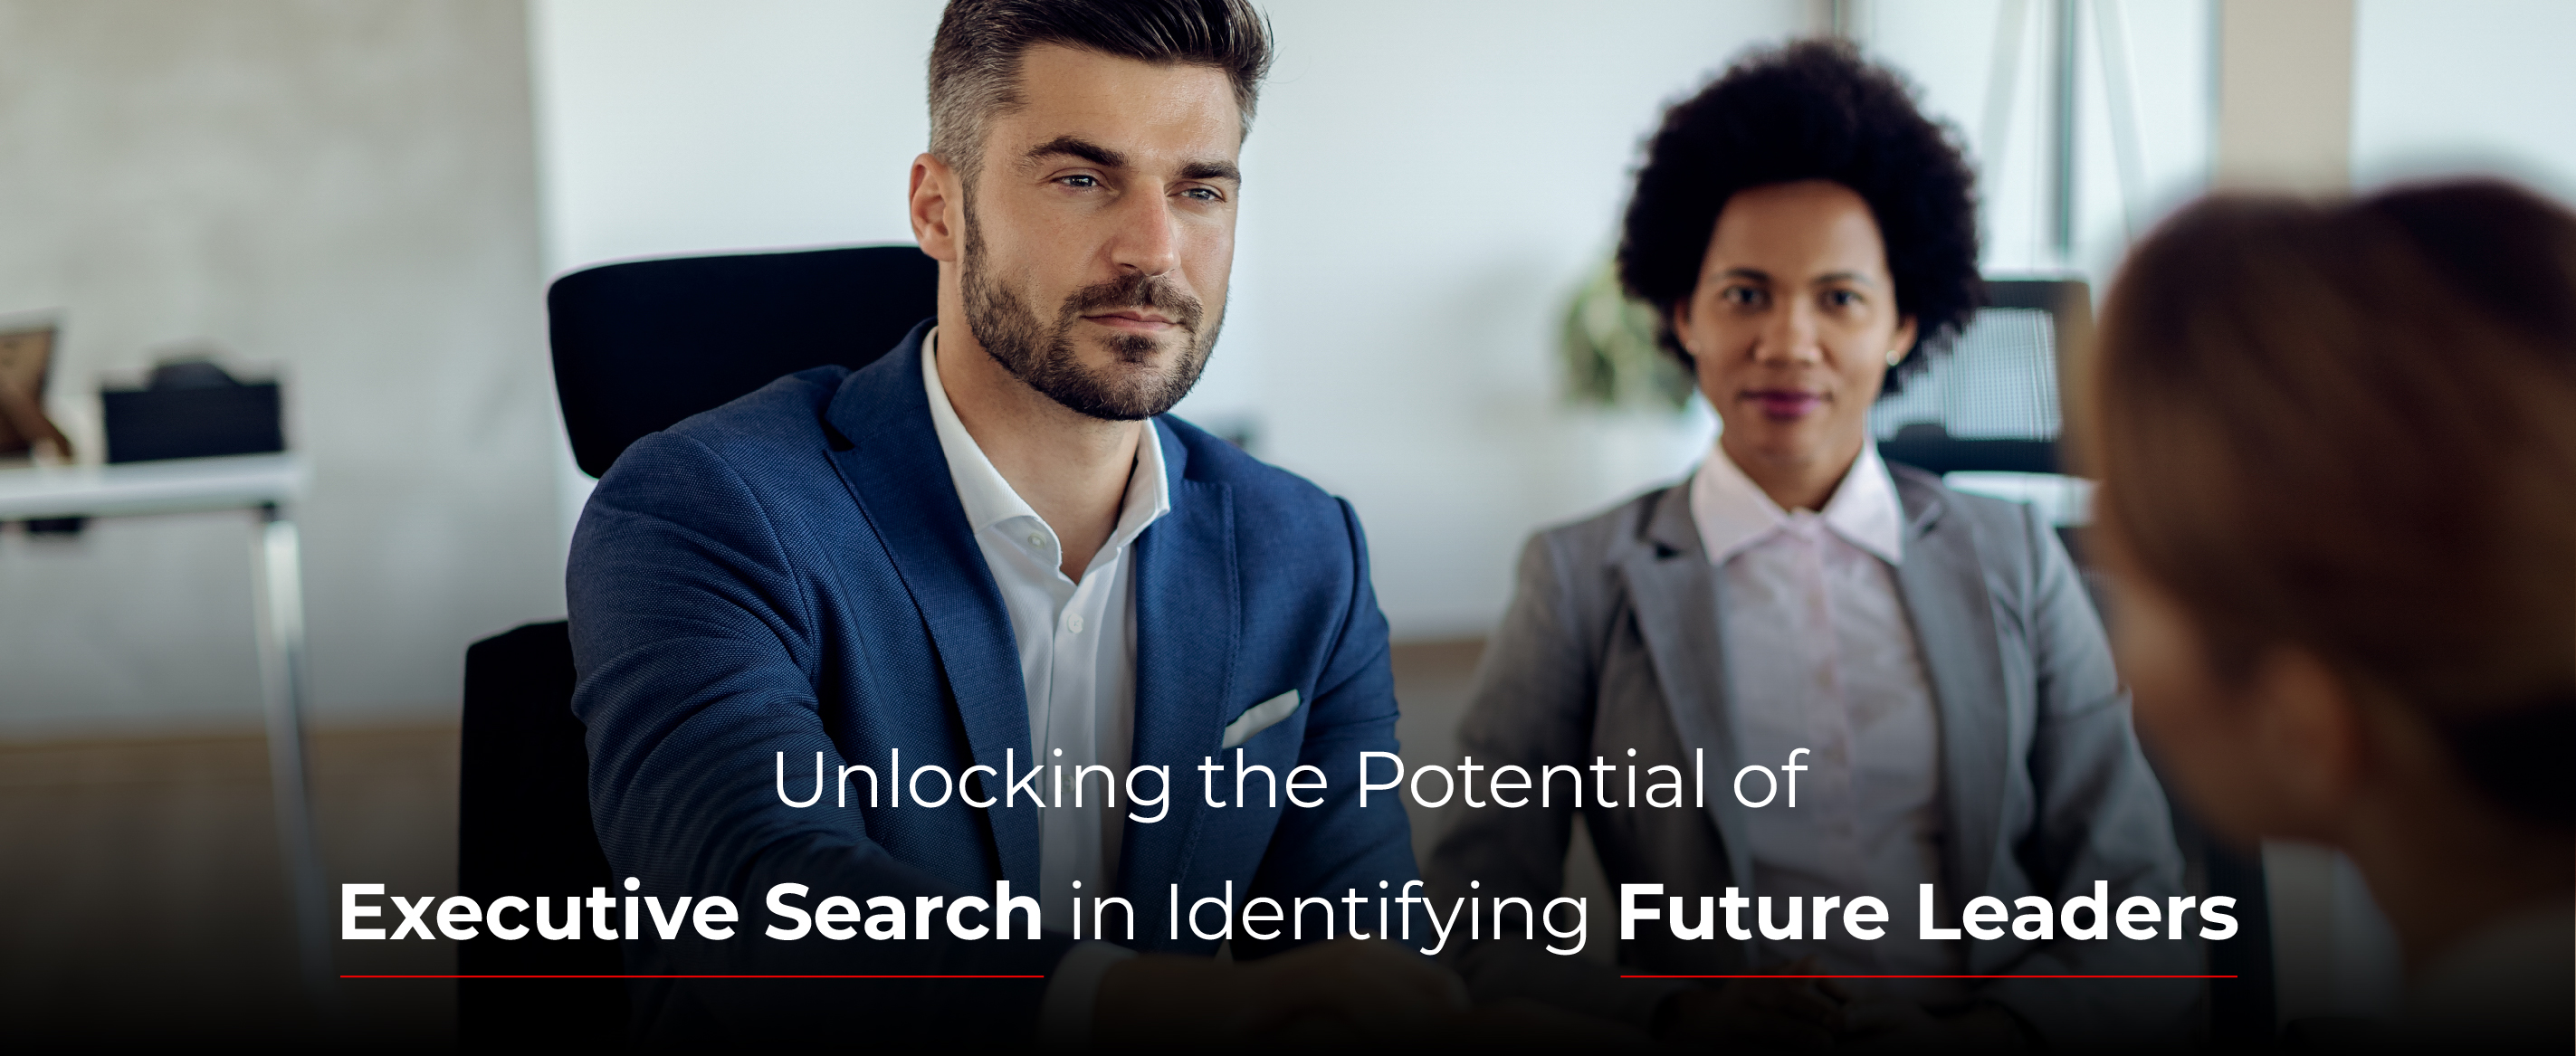 Unlocking the Potential of Executive Search in Identifying Future Leaders